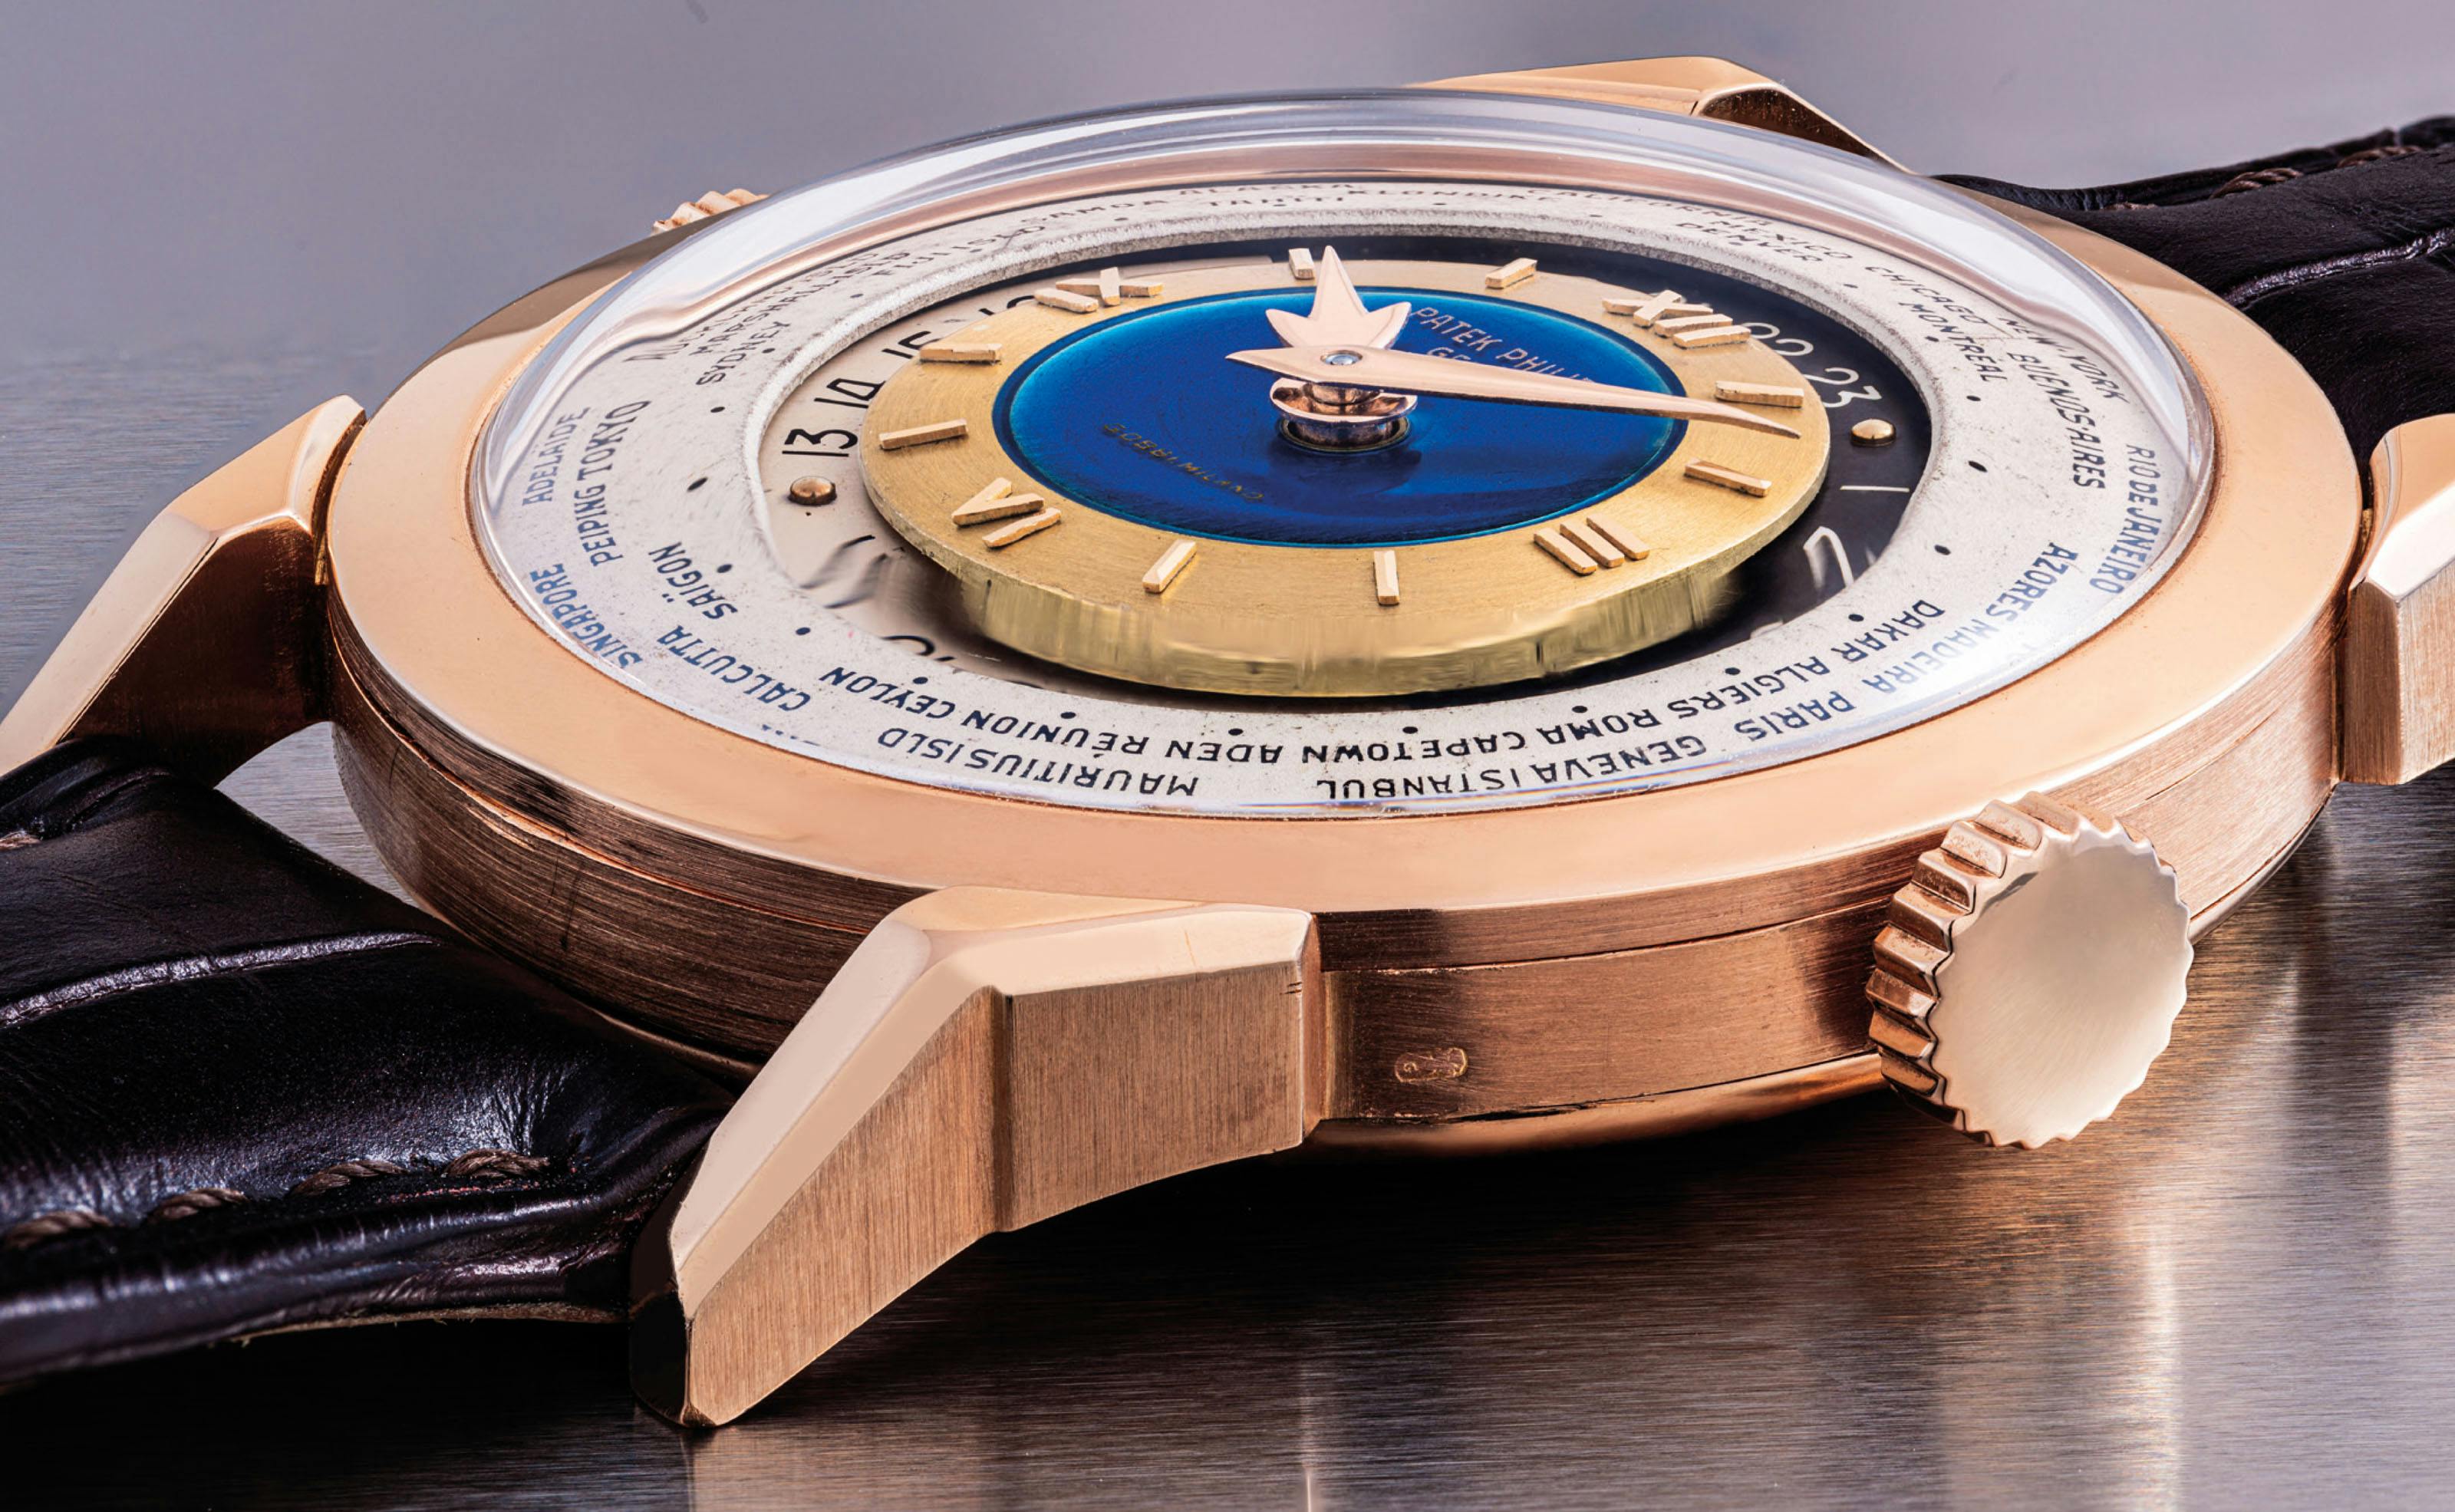 Patek Philippe brings back the 'holy grail' of watches for 170 lucky buyers